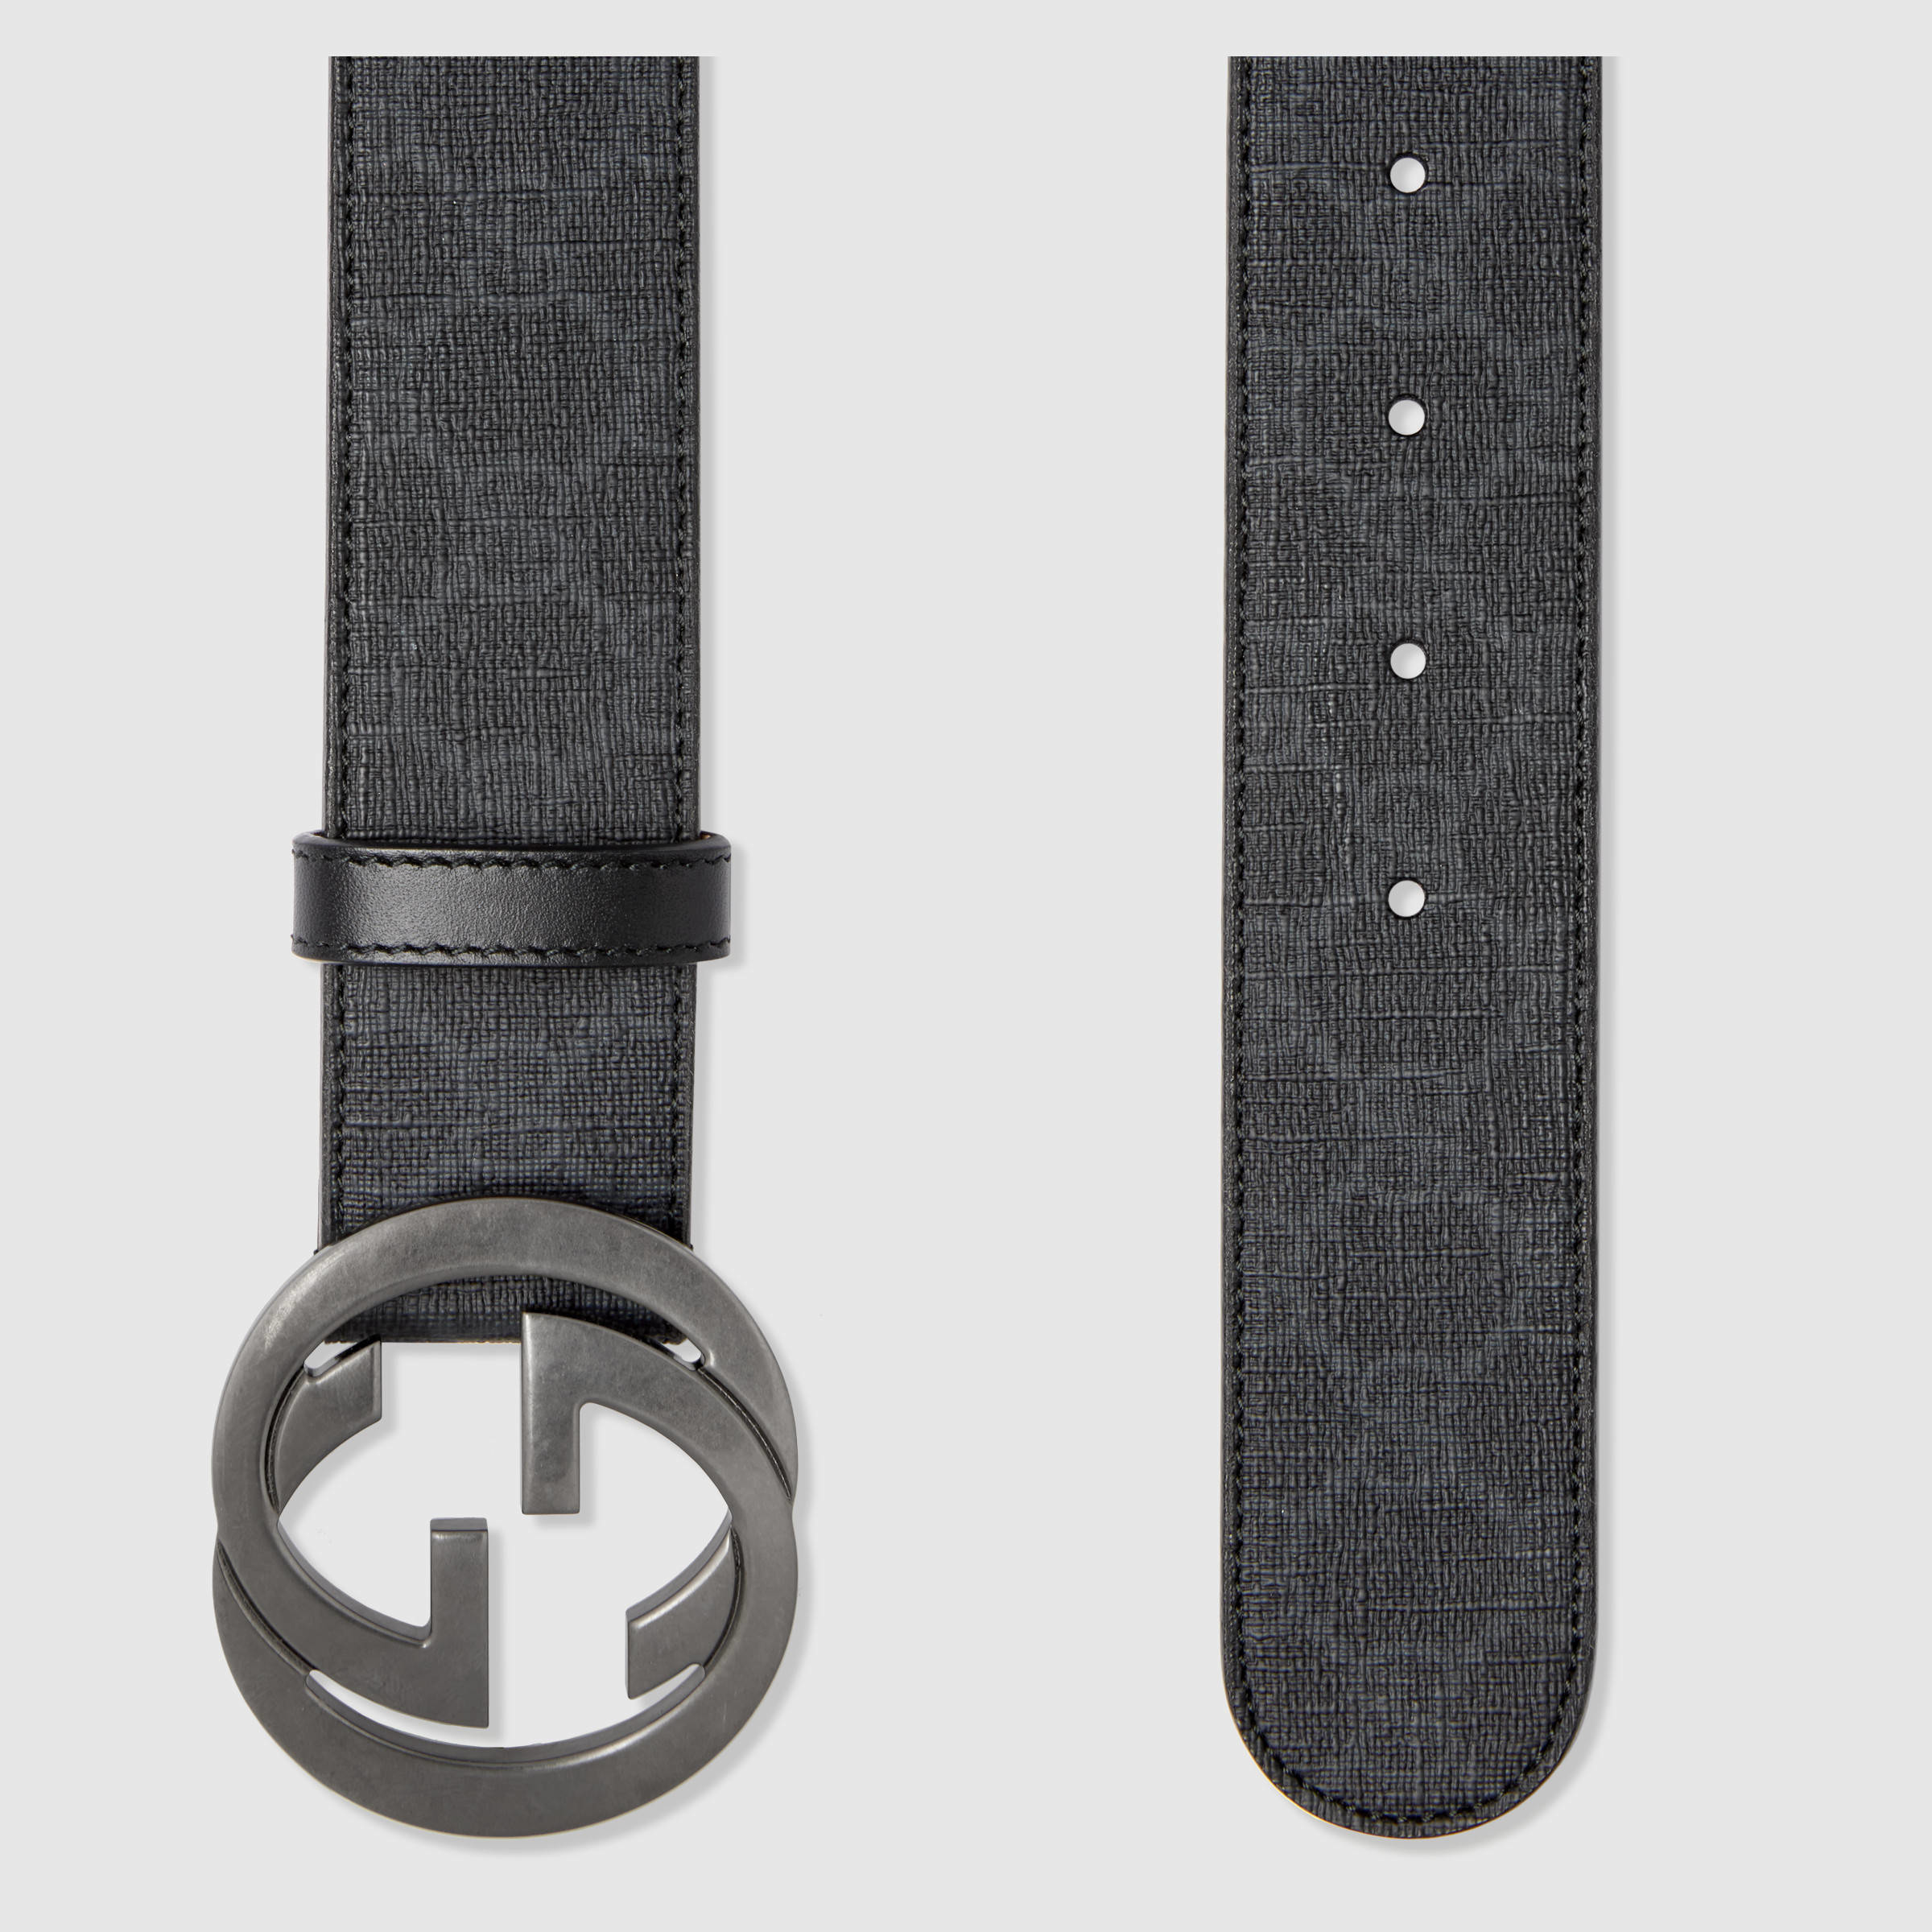 Lyst - Gucci Gg Supreme Belt With G Buckle in Black for Men